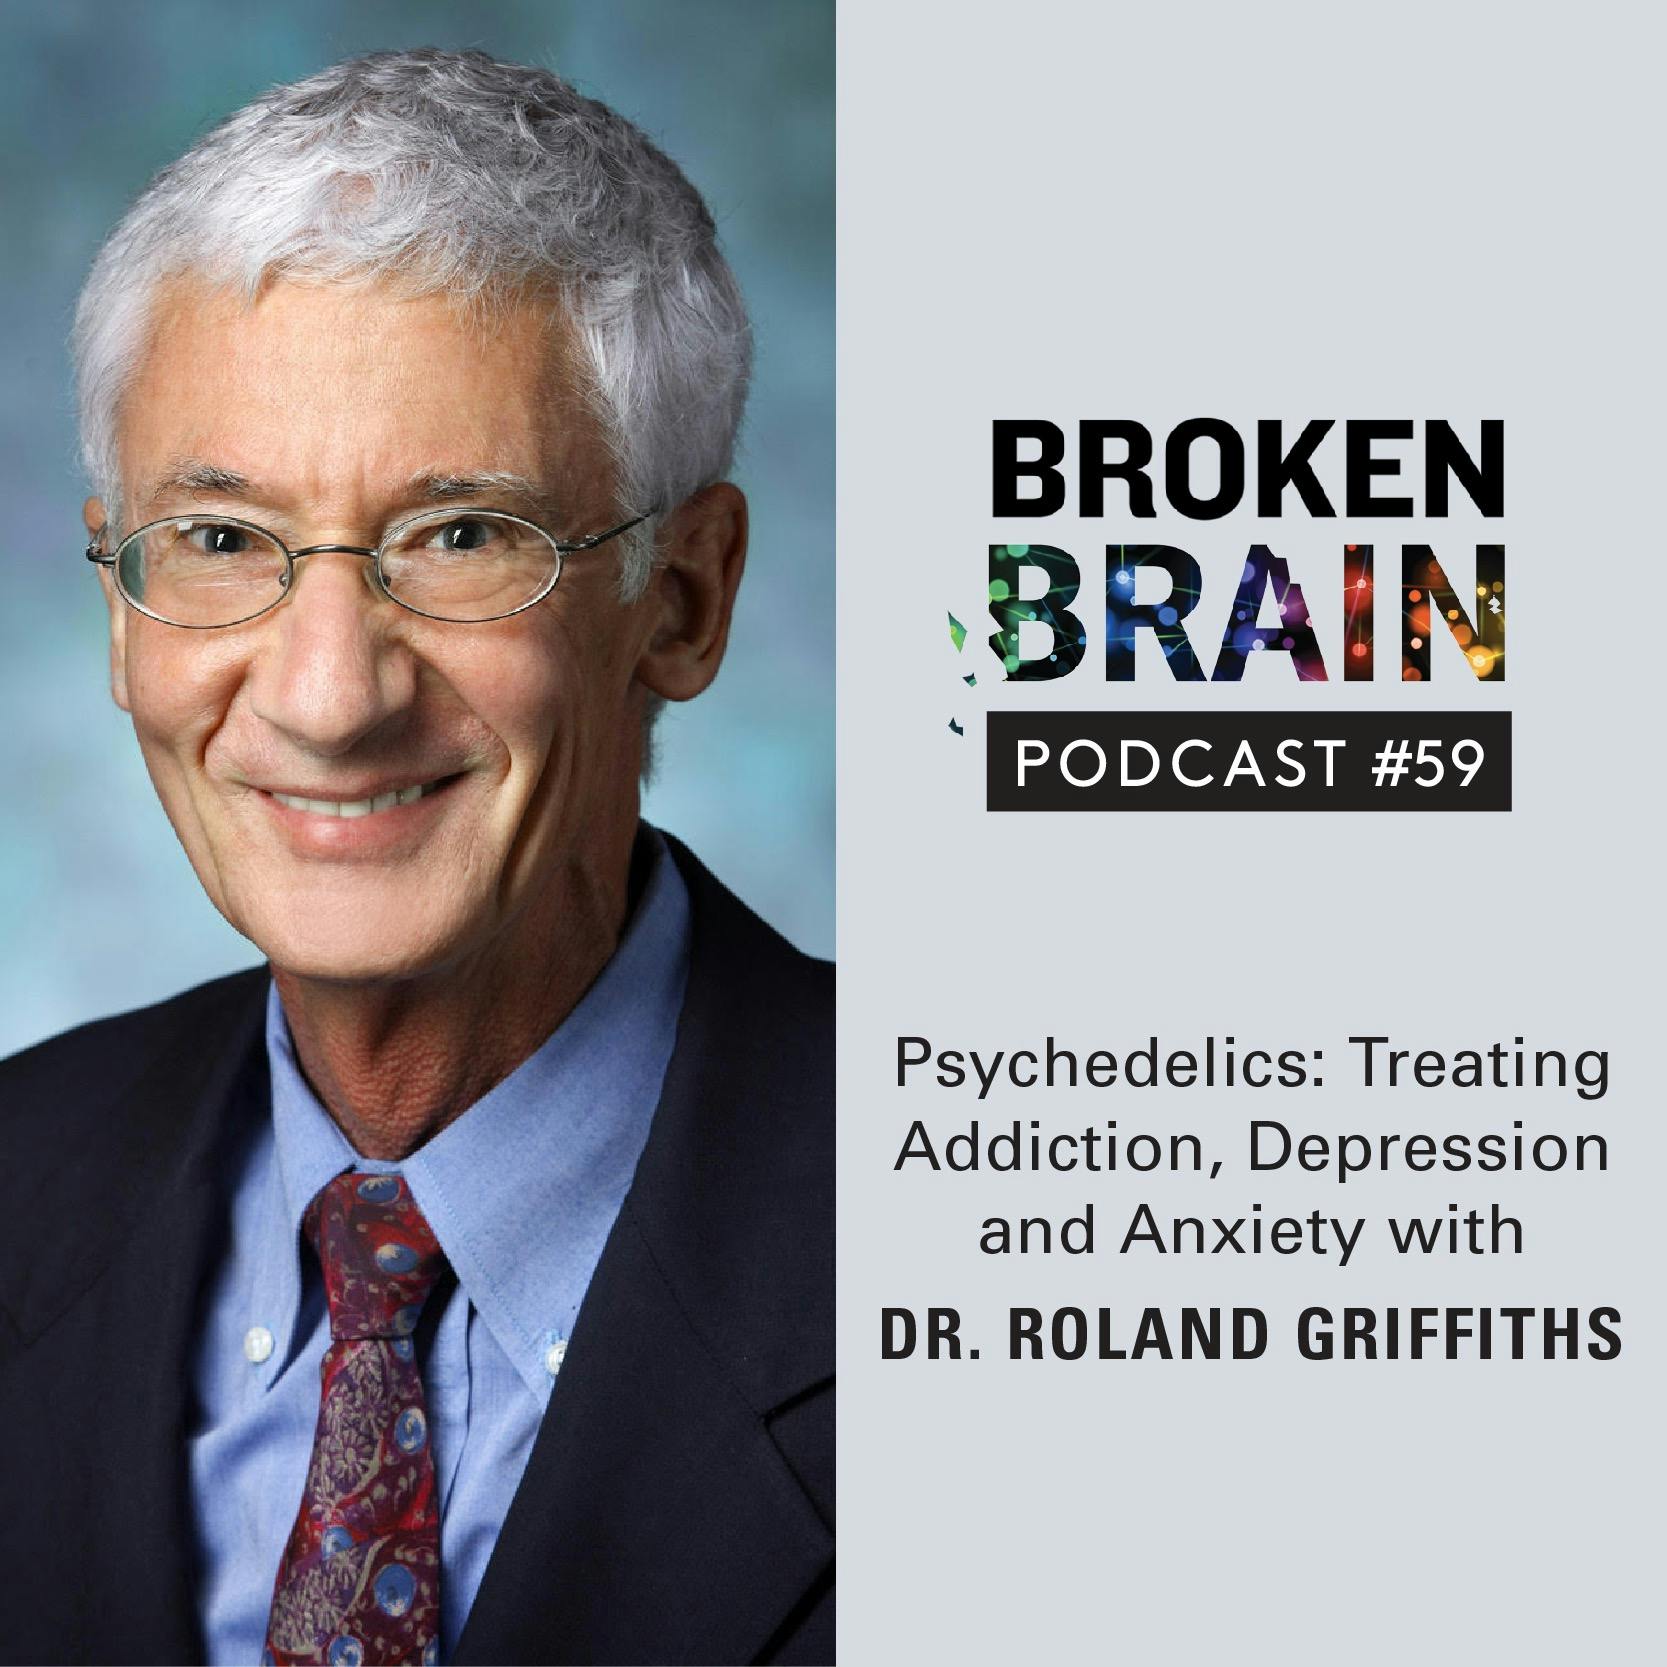 #59: Psychedelics: Treating Addiction, Depression and Anxiety with Dr. Roland Griffiths